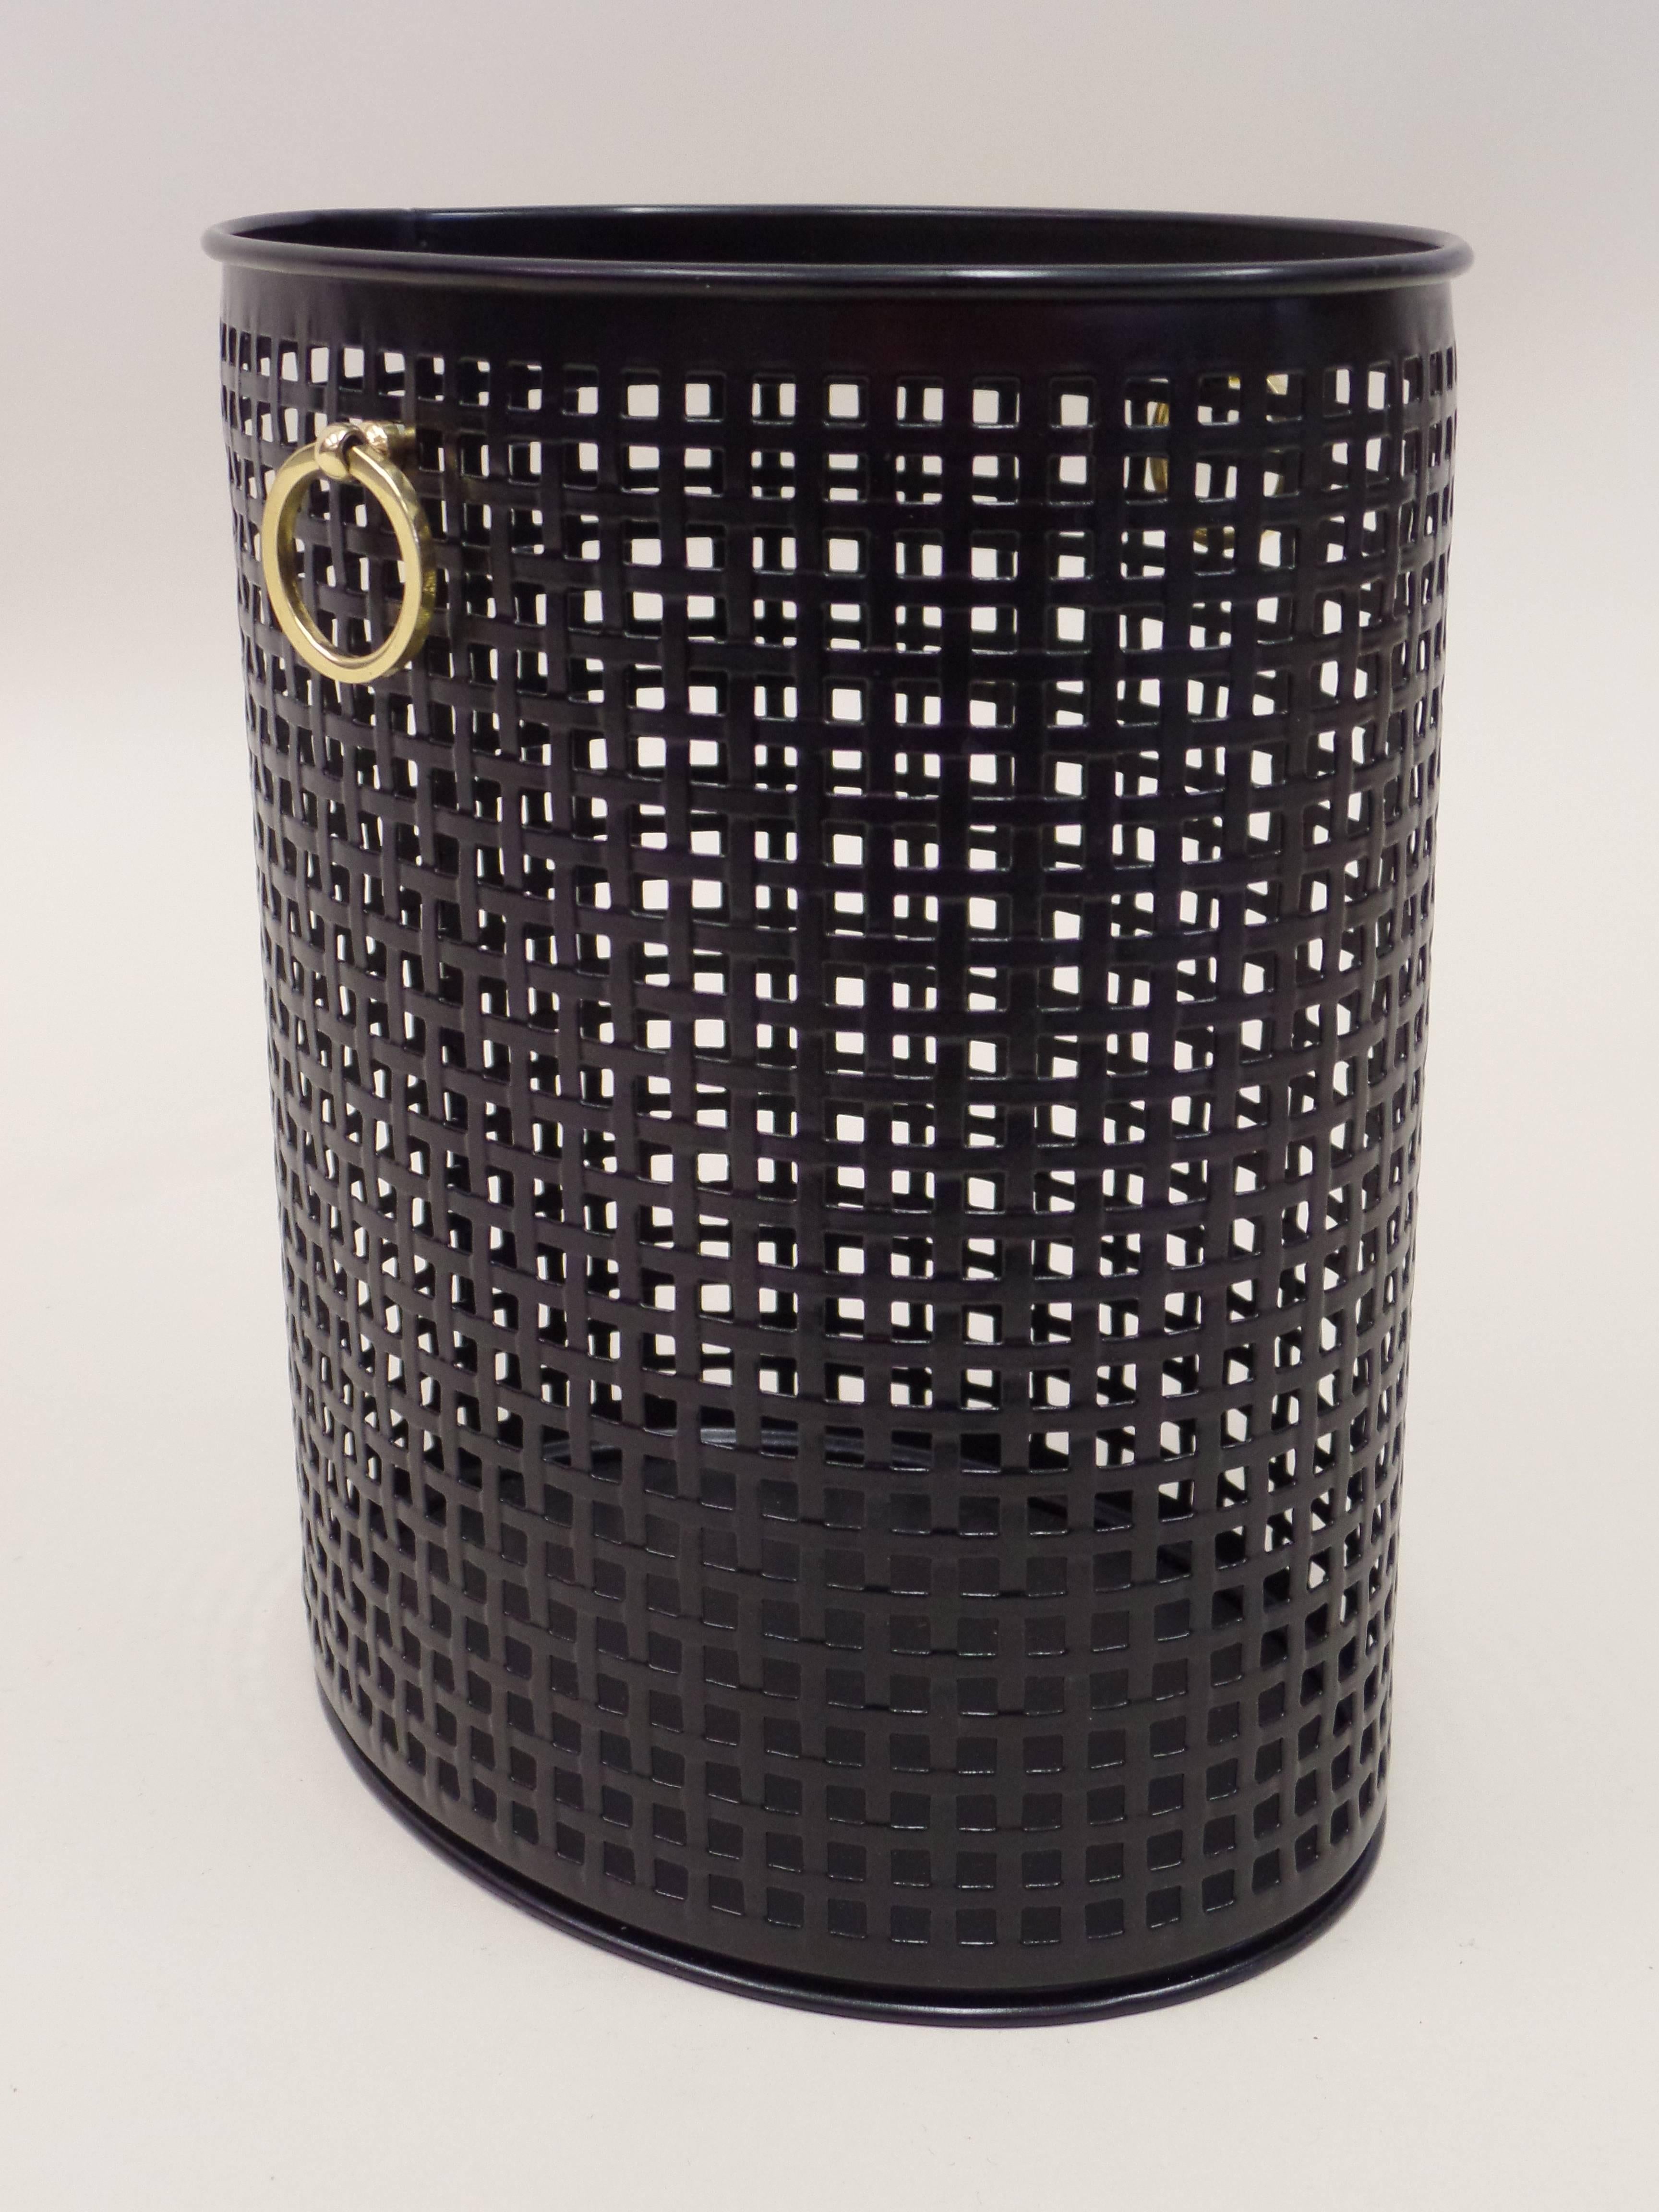 20th Century French Modern Neoclassical Waste Basket Attributed to Jacques Adnet, 1950